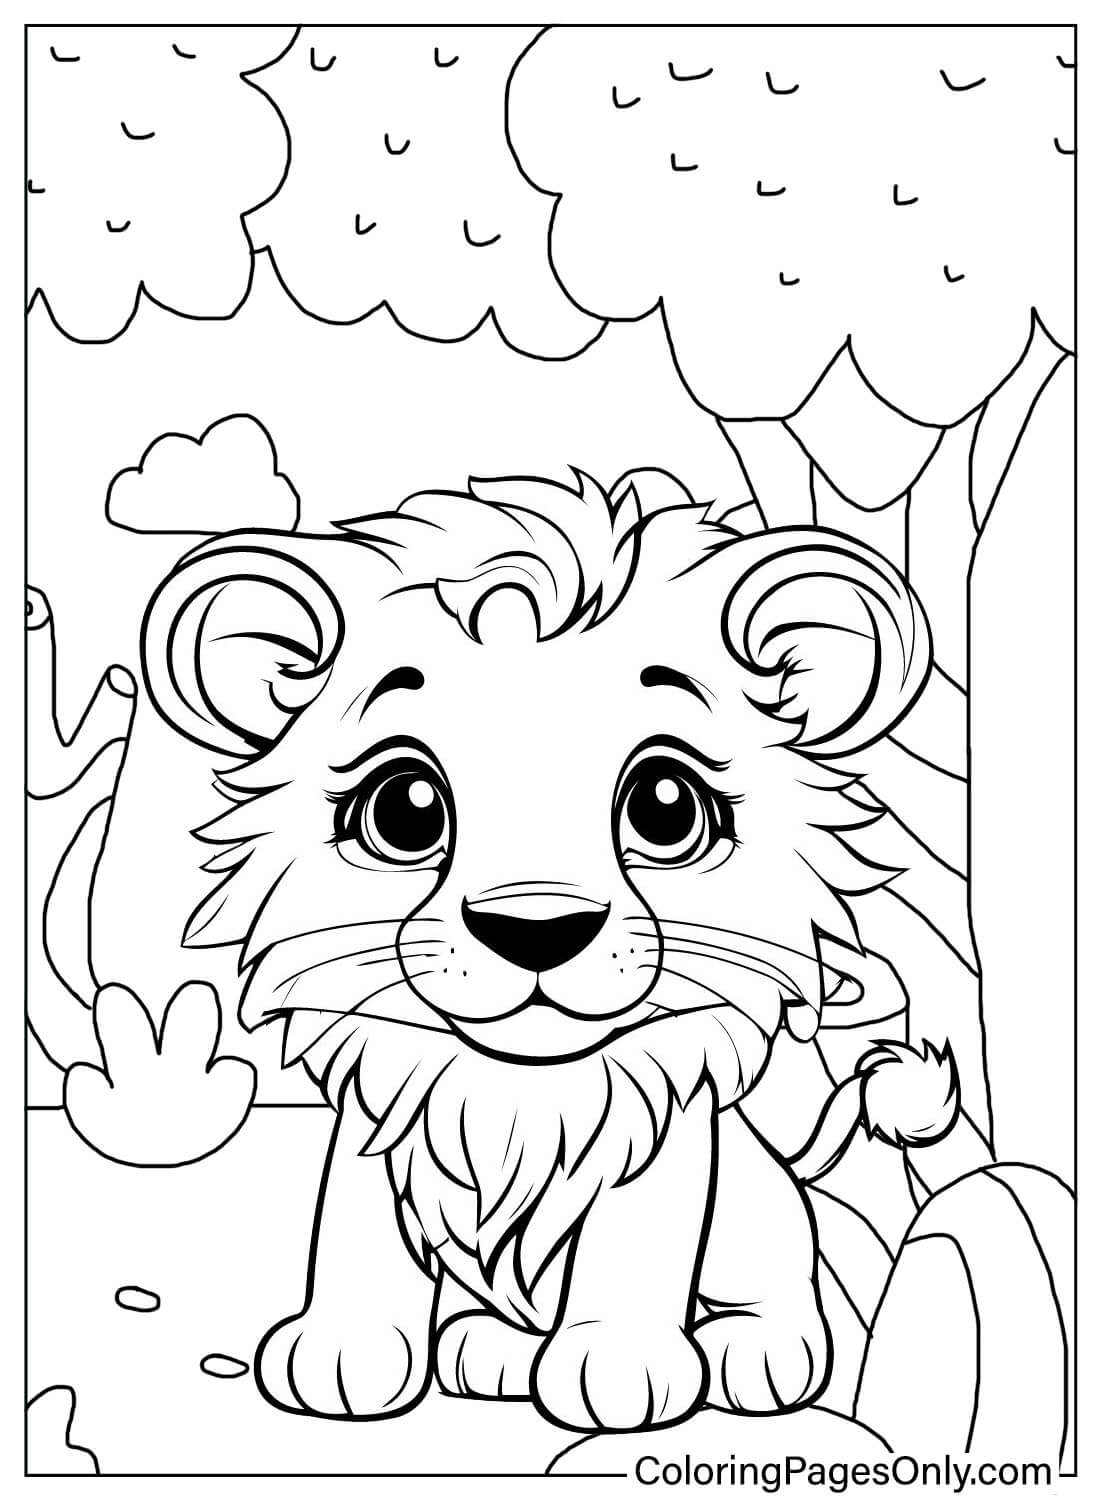 Lion Printable Coloring Page - Free Printable Coloring Pages